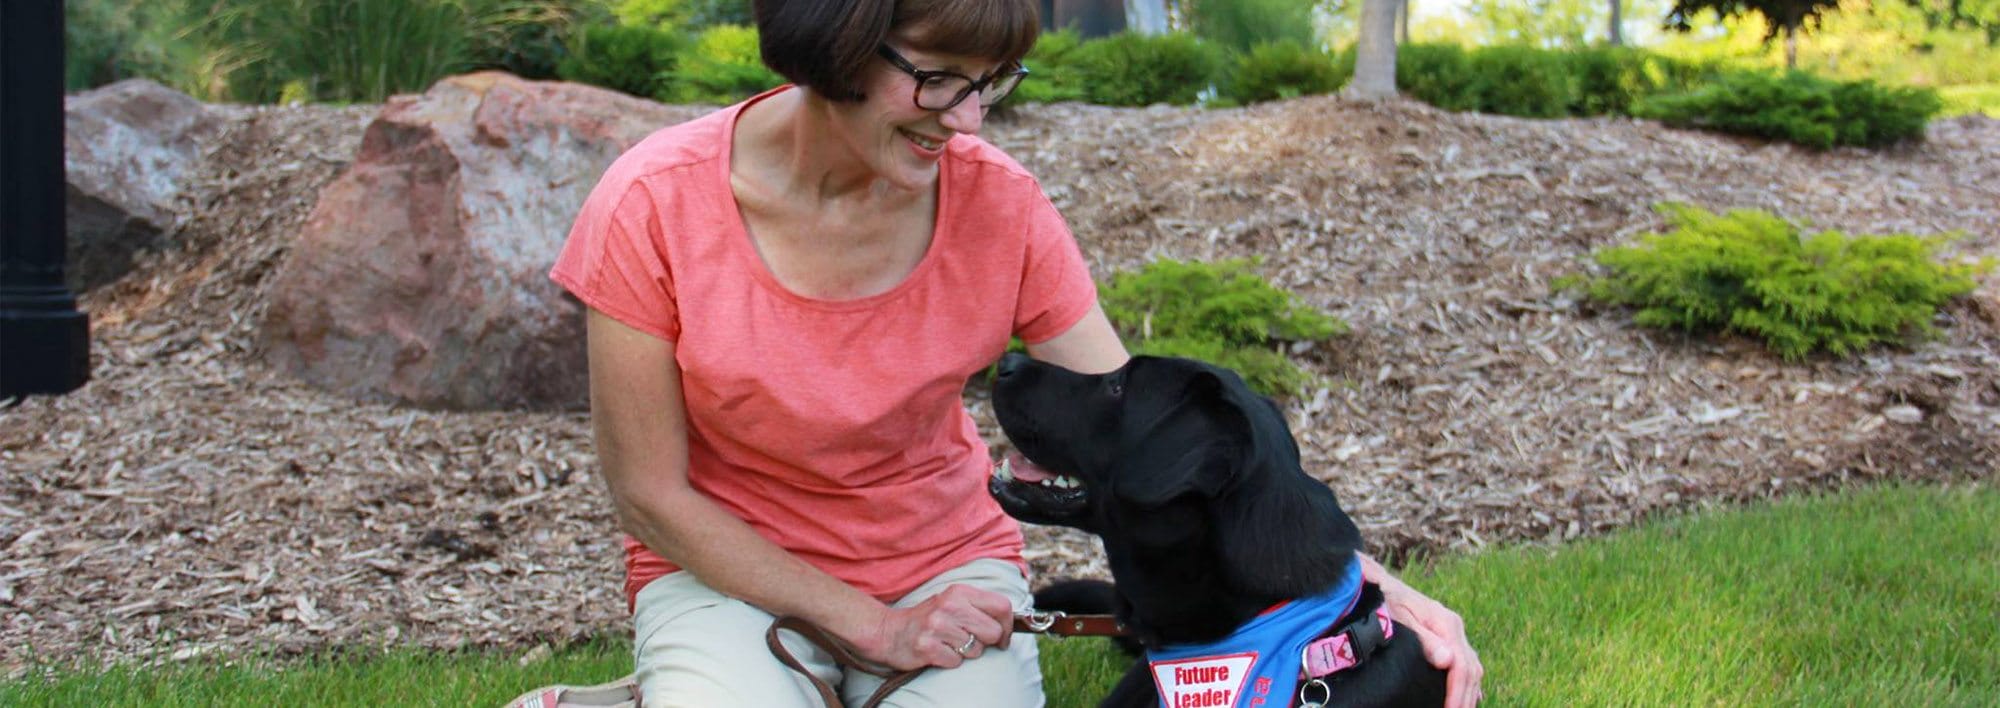 A woman kneels on grass in a neatly manicured yard. She is smiling at the black lab lying next to her on the grass. The lab is wearing a Future Leader Dog bandanna and looking up at the woman